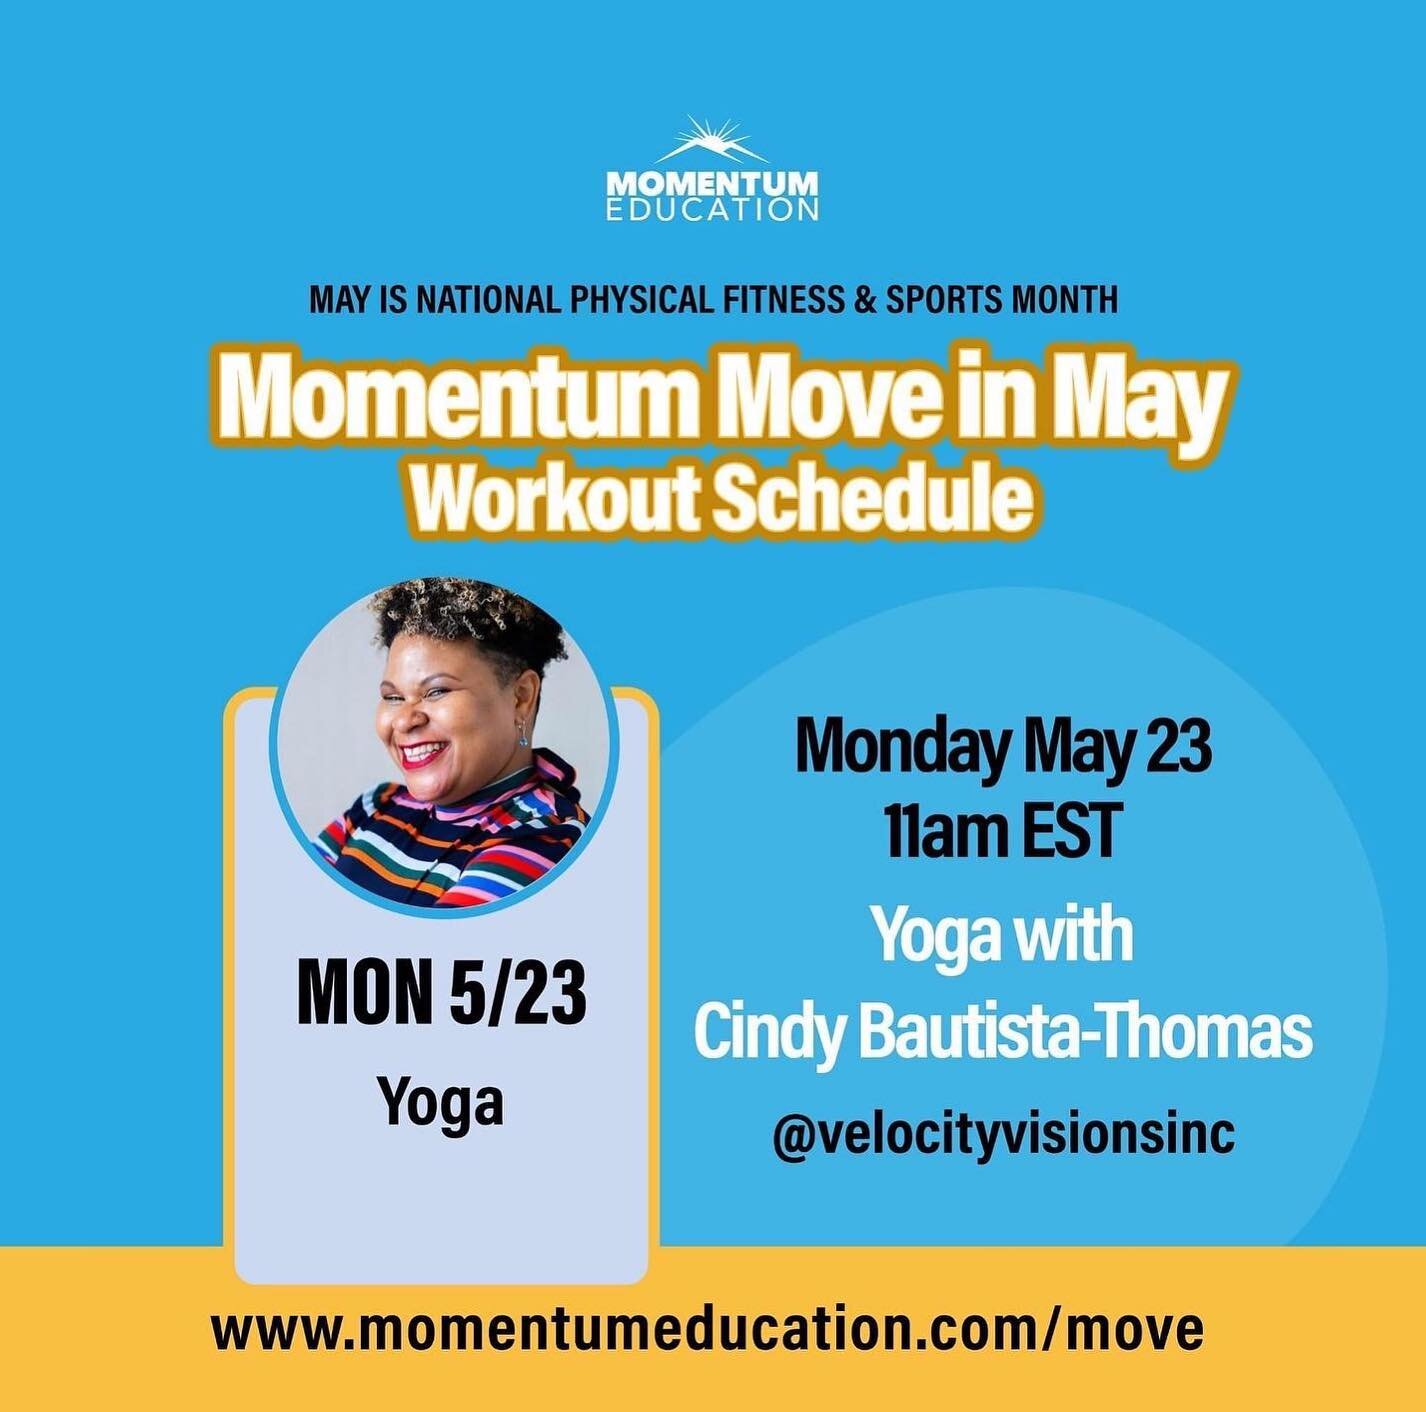 May is National Physical Fitness &amp; Sports Month! May is also Mental Health month! Join @drcindybautistathomas for a 20 minute yoga practice on Monday, May 23rd at 11 am. 

#repost @momentumeducation 
We wanted to send you a giveback while also fe